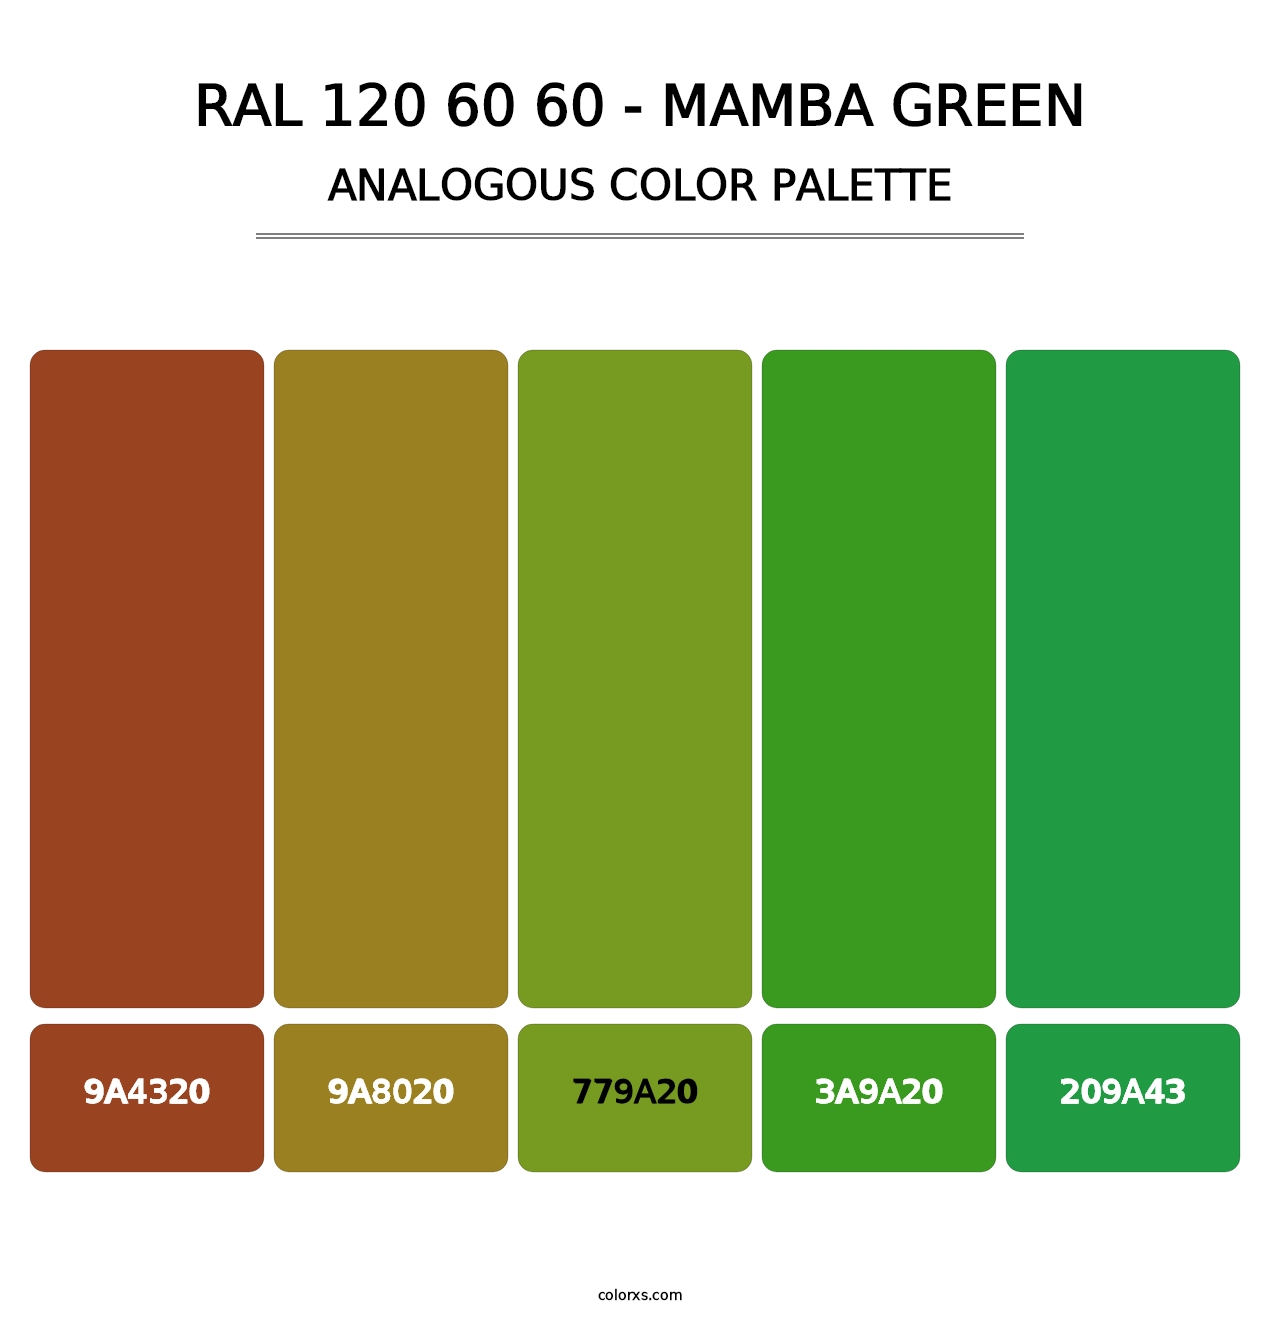 RAL 120 60 60 - Mamba Green - Analogous Color Palette